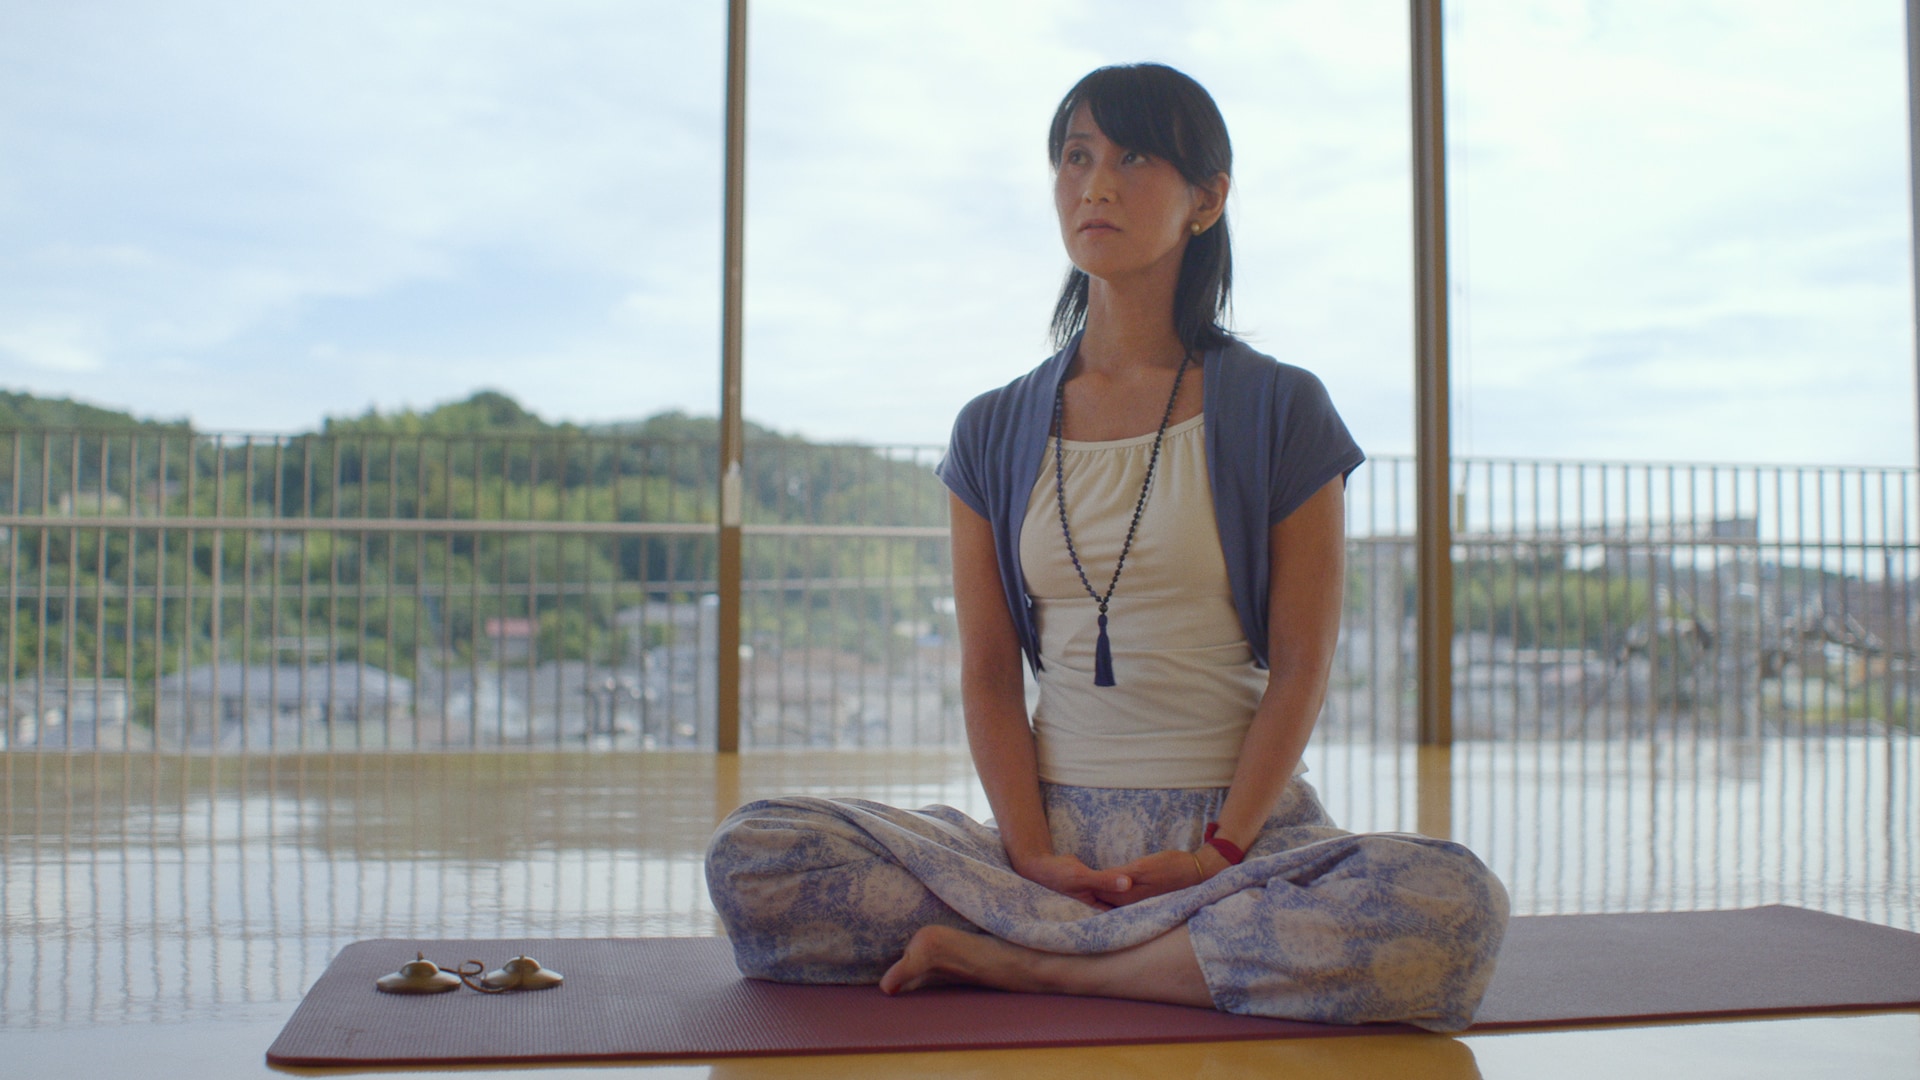 Rika in a yoga pose